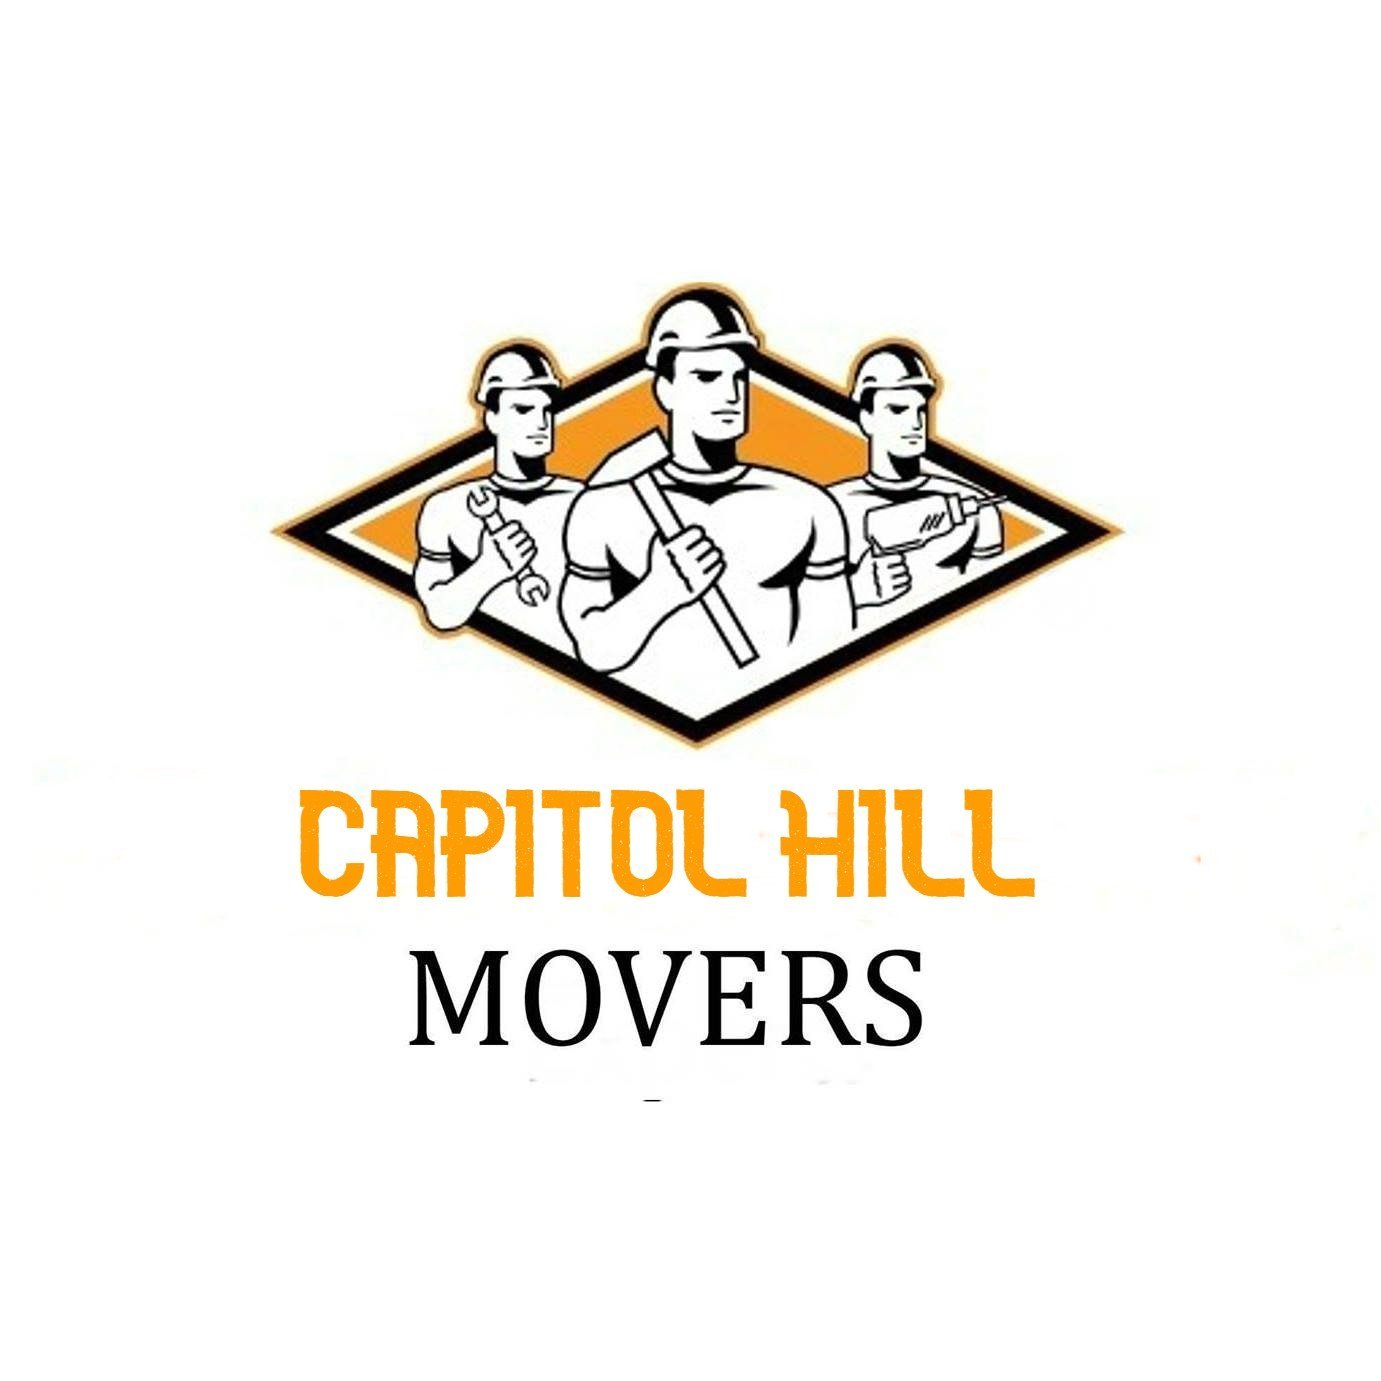 Southern Maryland Movers